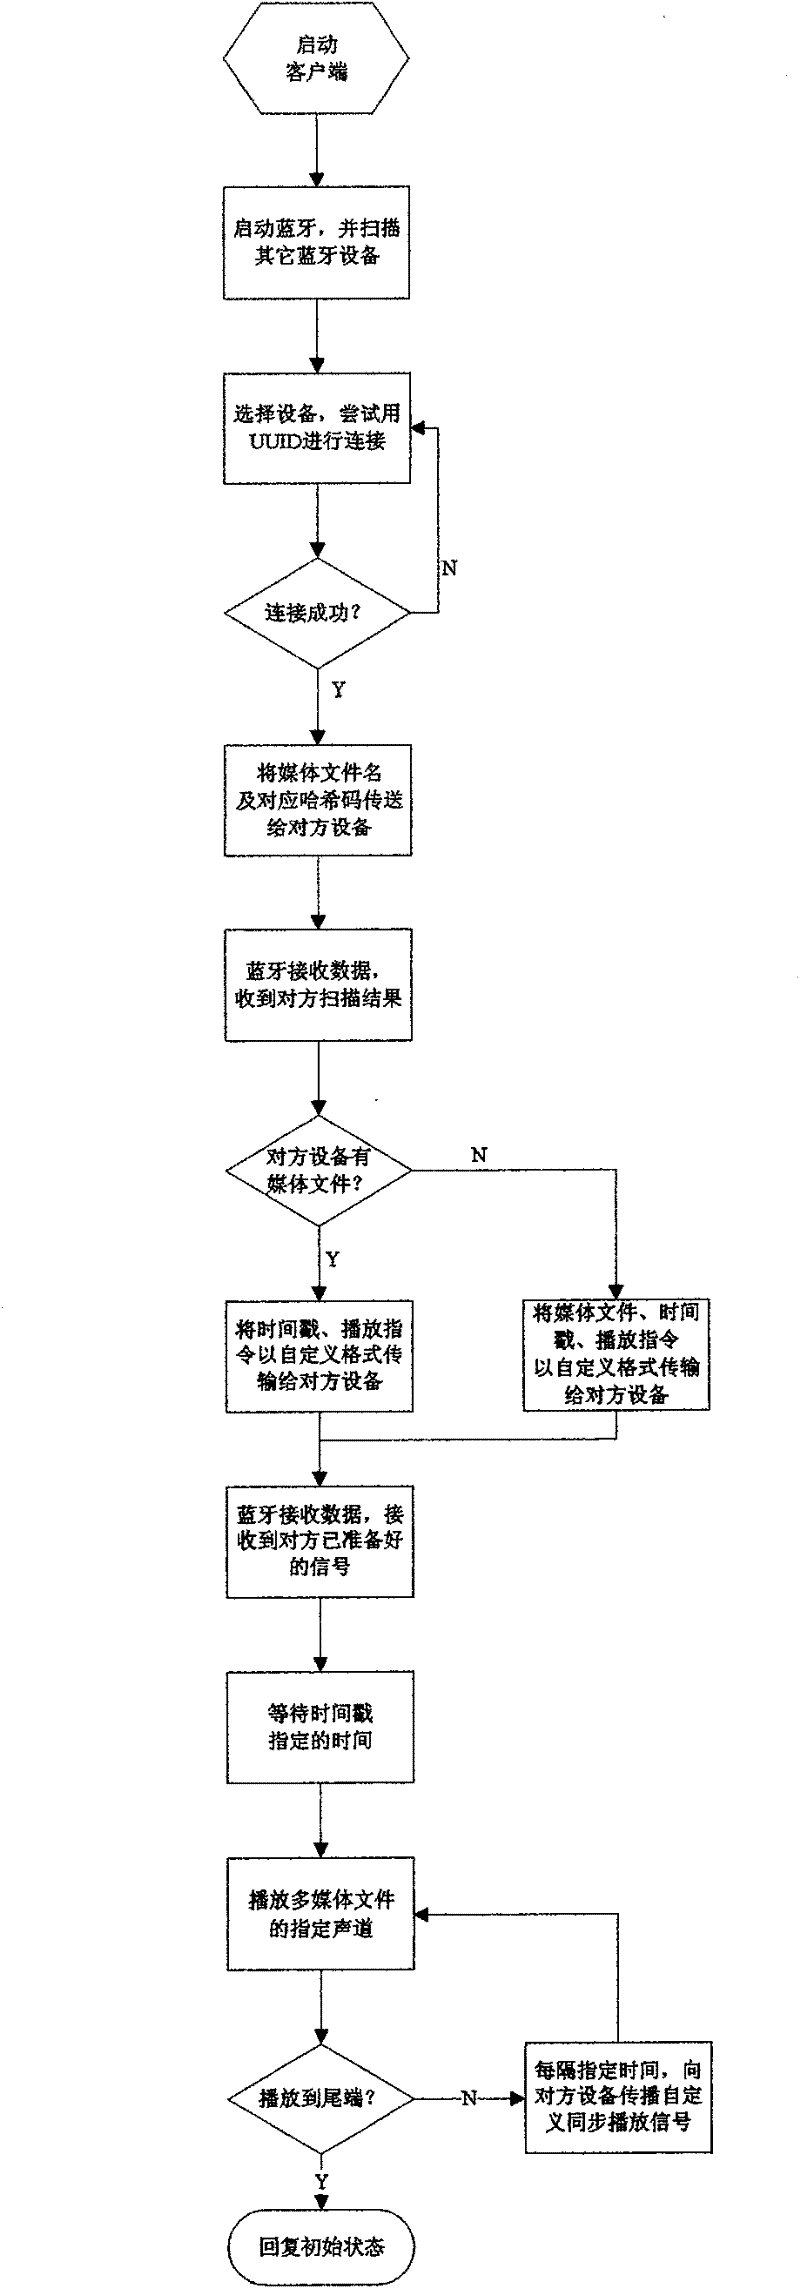 Realization system and method for split-type multi-channel synchronous play for multimedia file based on wireless transmission technology